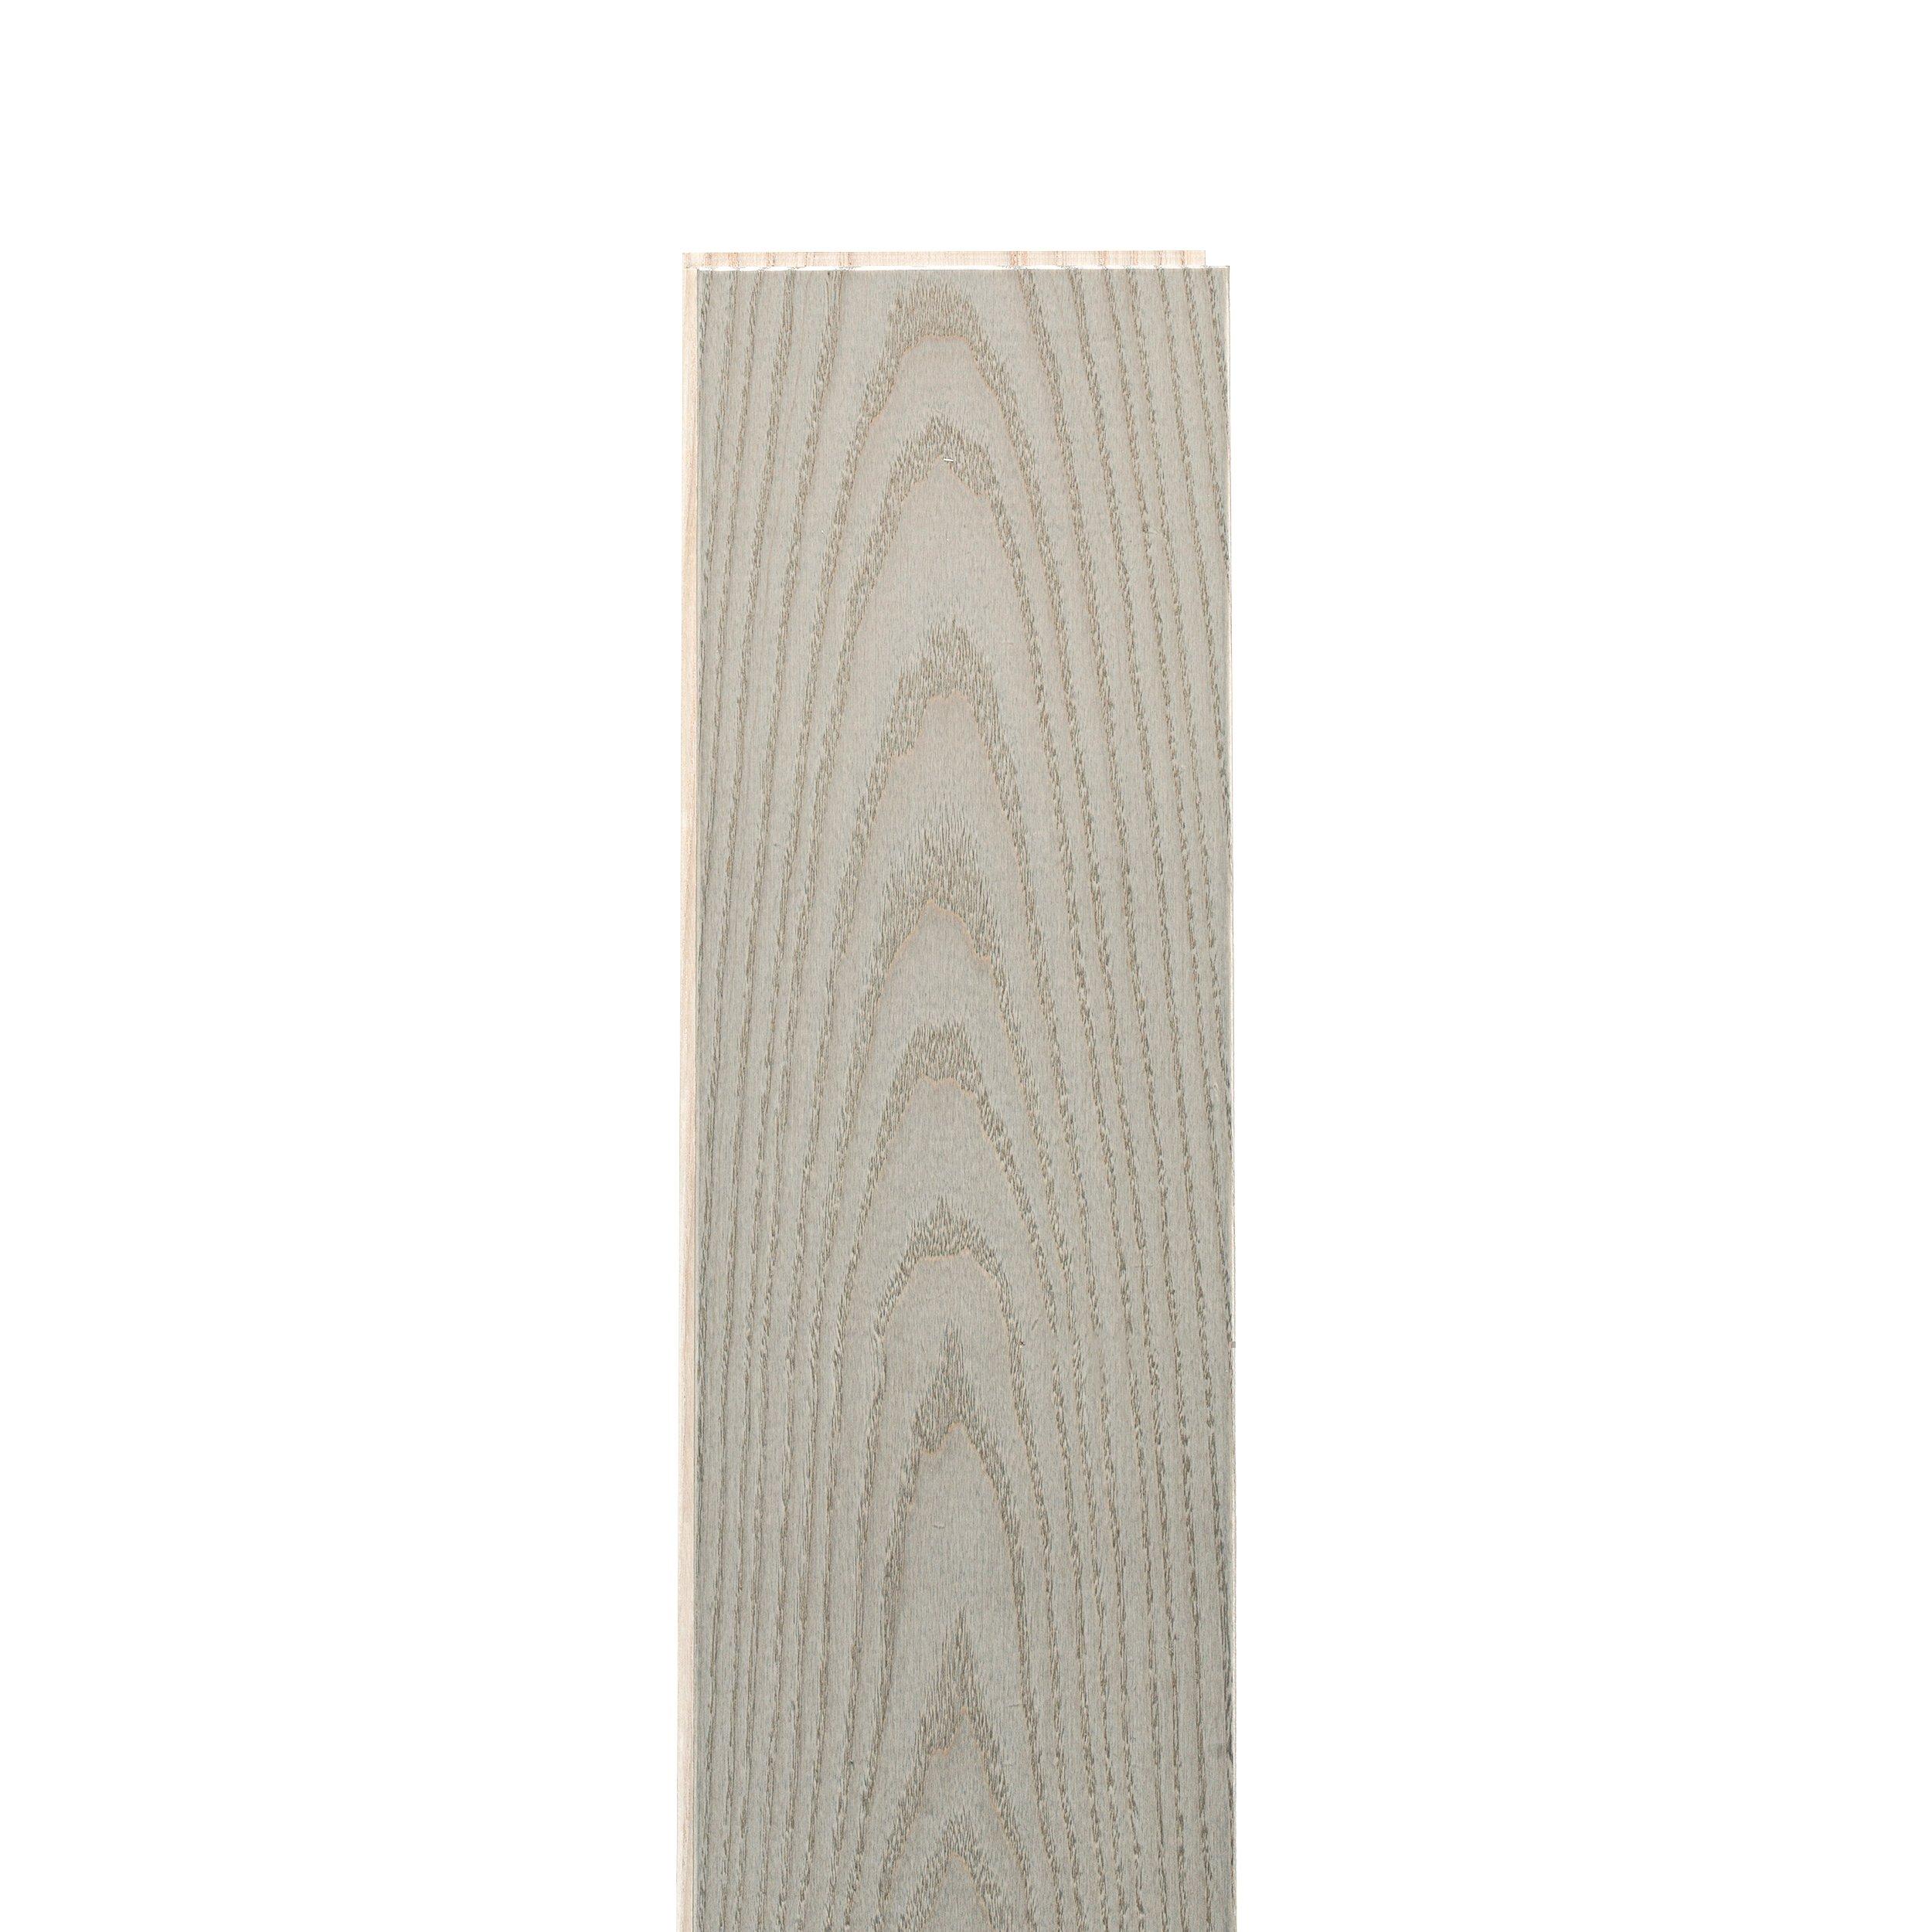 Zenia Ash Wire-Brushed Solid Hardwood